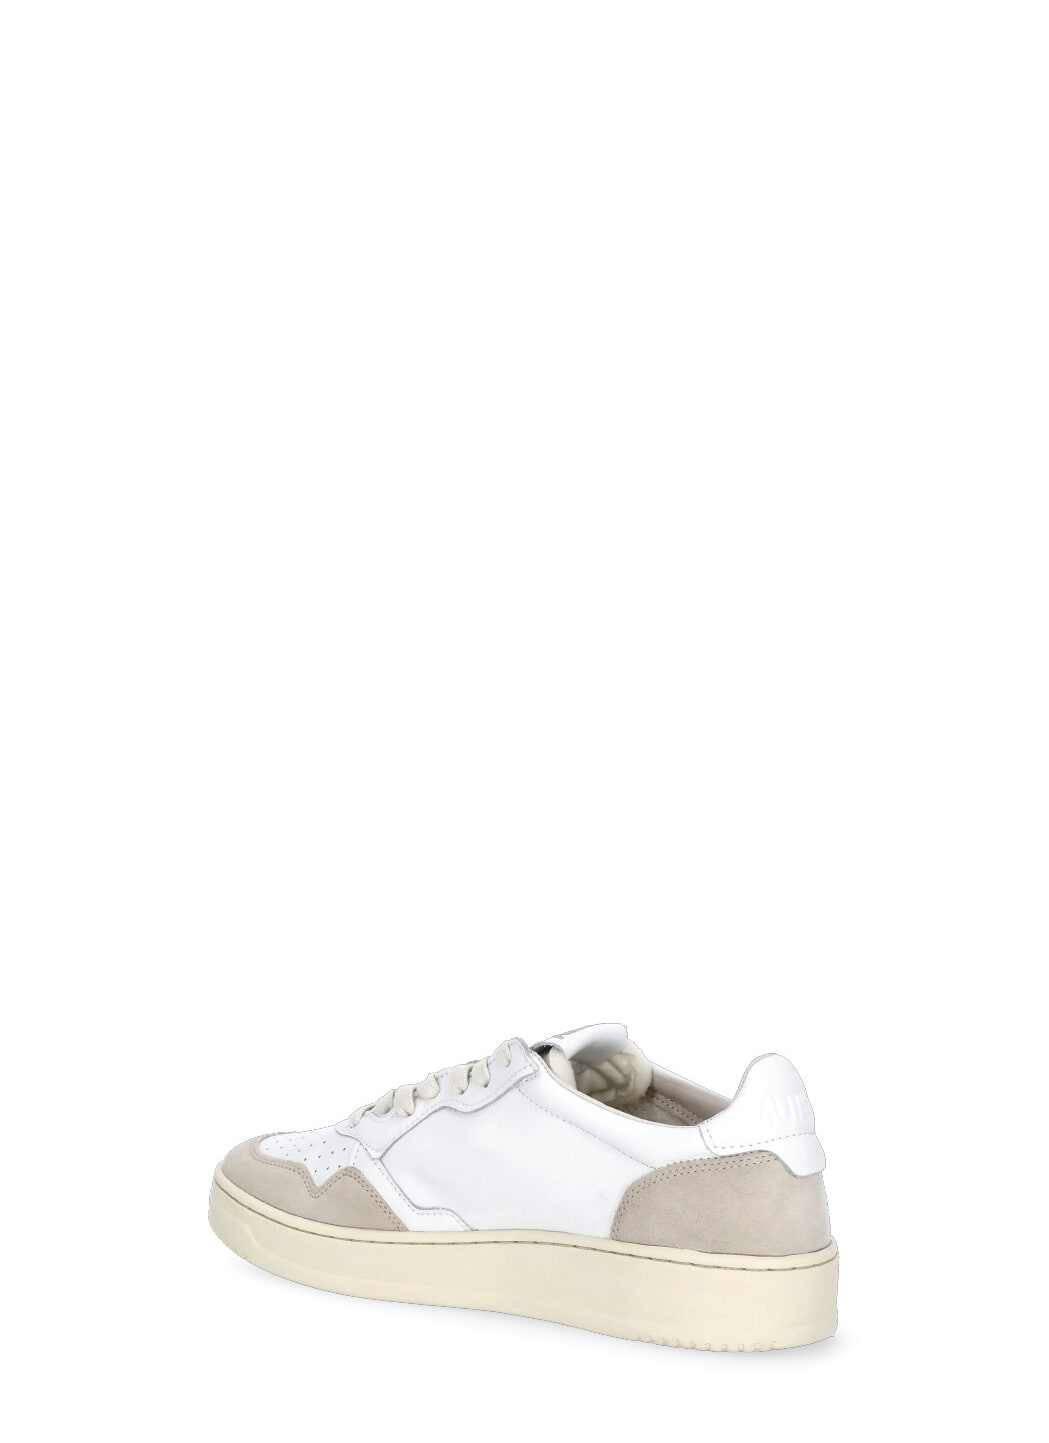 Shop Autry Aulm Ls33 Sneakers In White